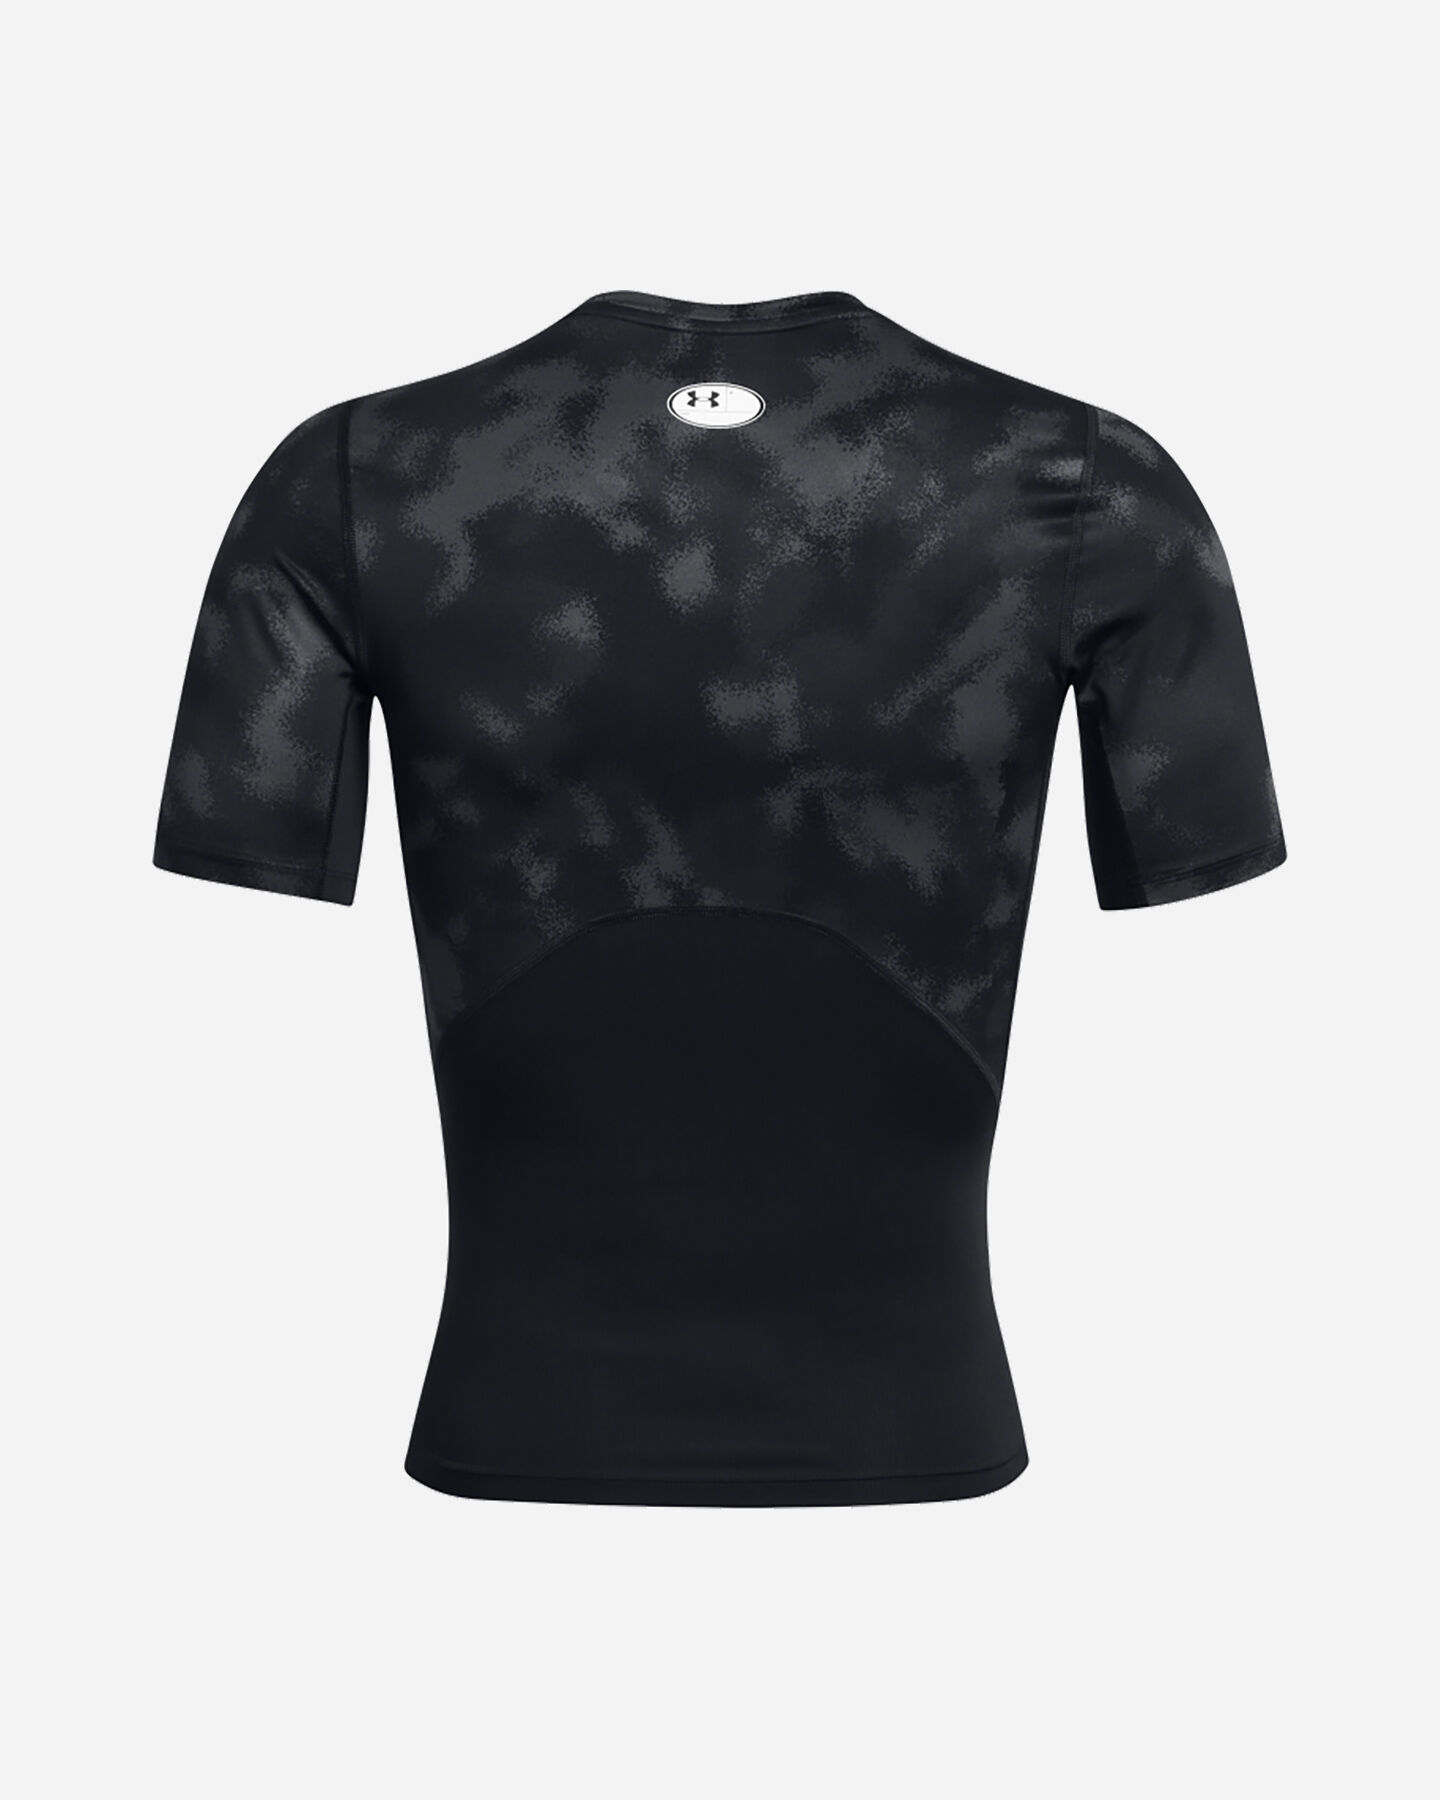  T-Shirt training UNDER ARMOUR HEAT GEAR CAMO M S5641781|0001|XS scatto 1